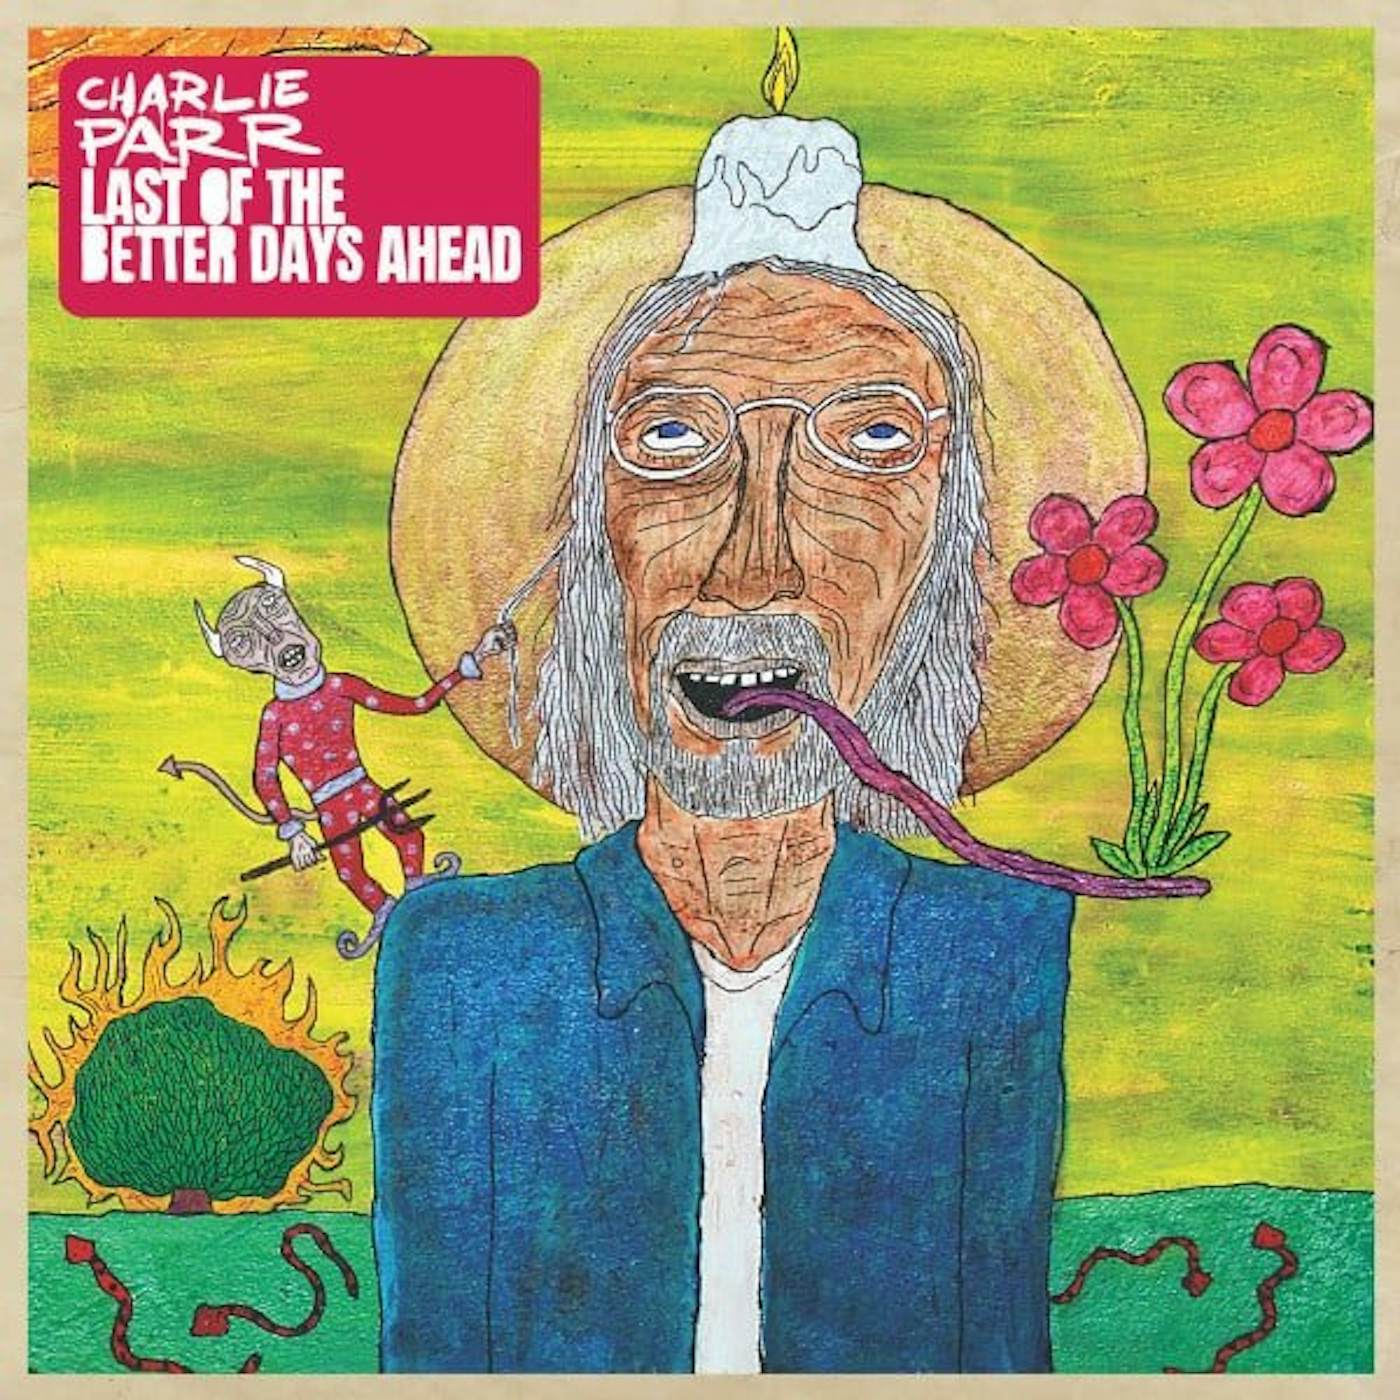 Charlie Parr LAST OF THE BETTER DAYS AHEAD (2LP) Vinyl Record